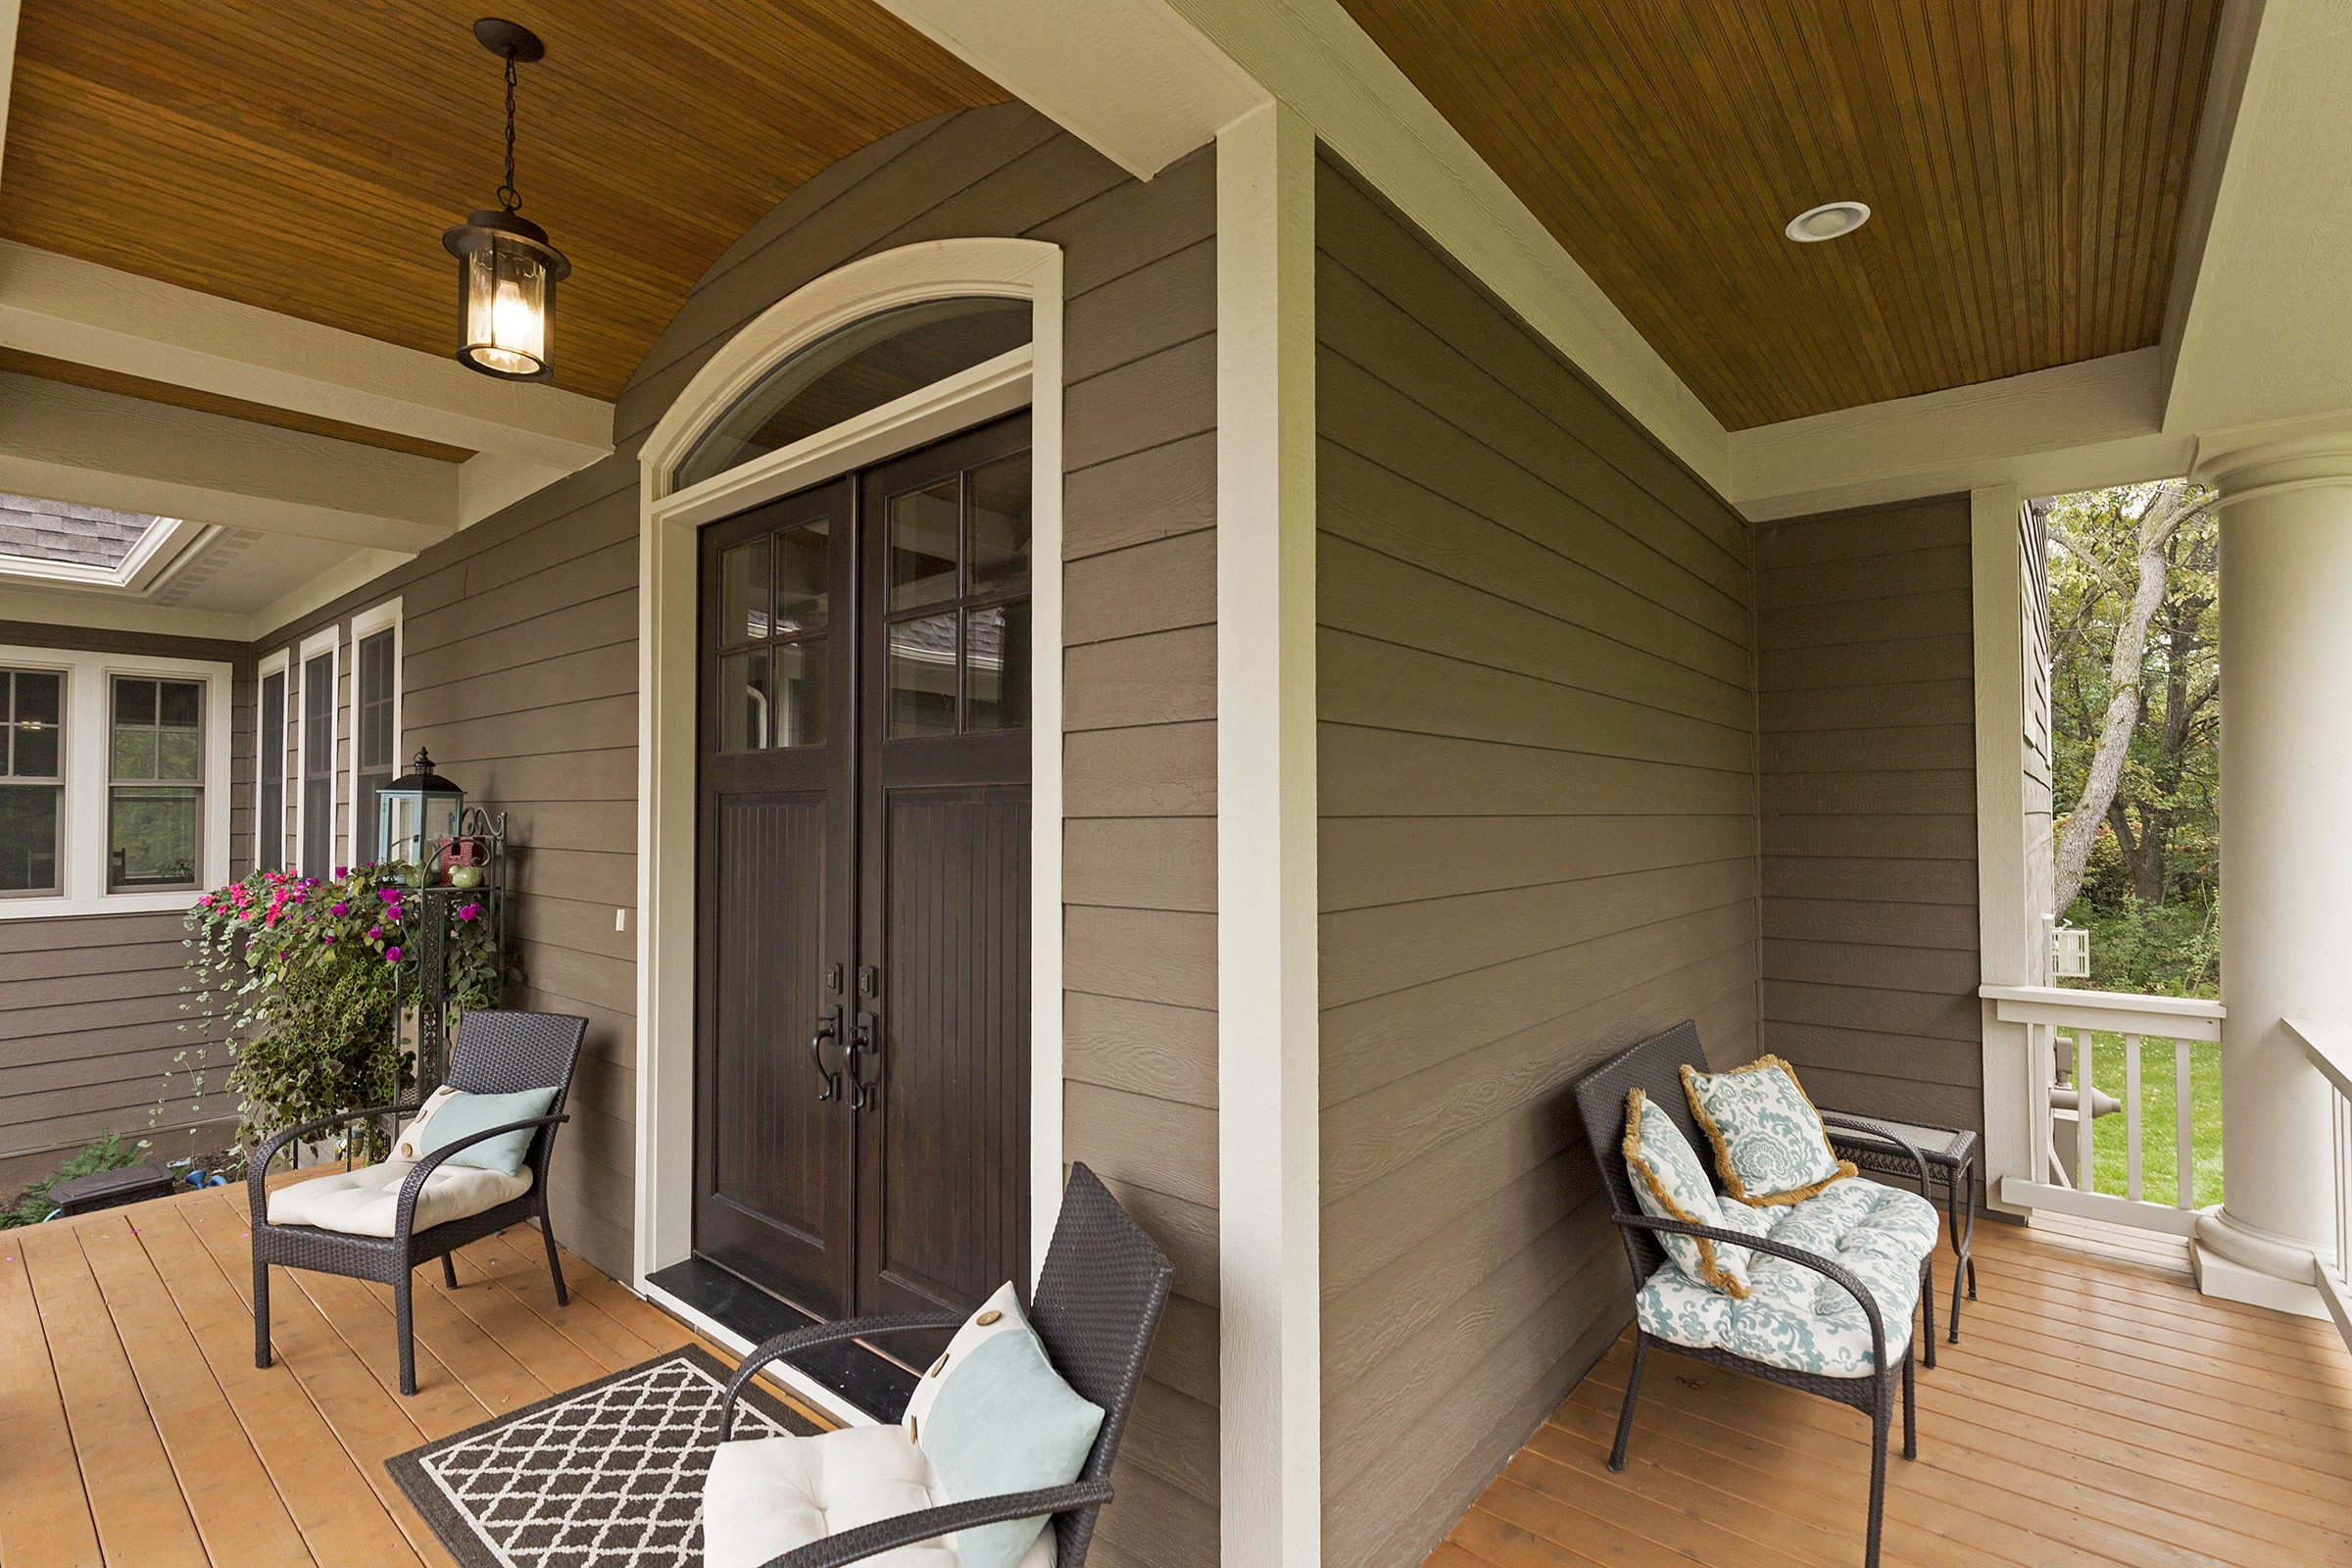 Enhance your home's curb appeal and value with a welcoming front porch featuring a table and chairs.